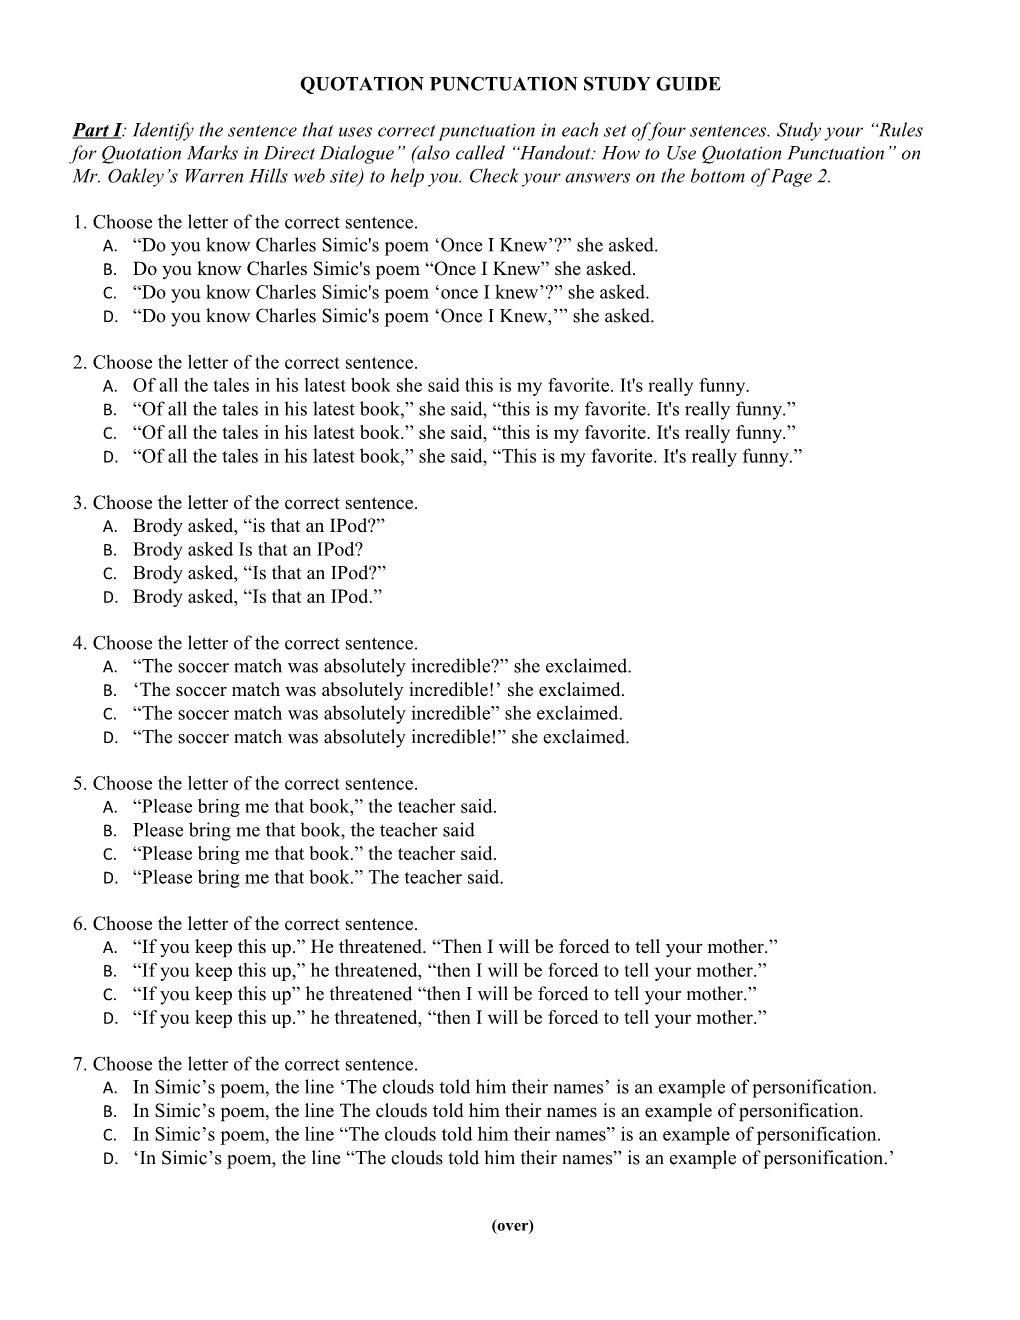 Quotation Punctuation Study Guide